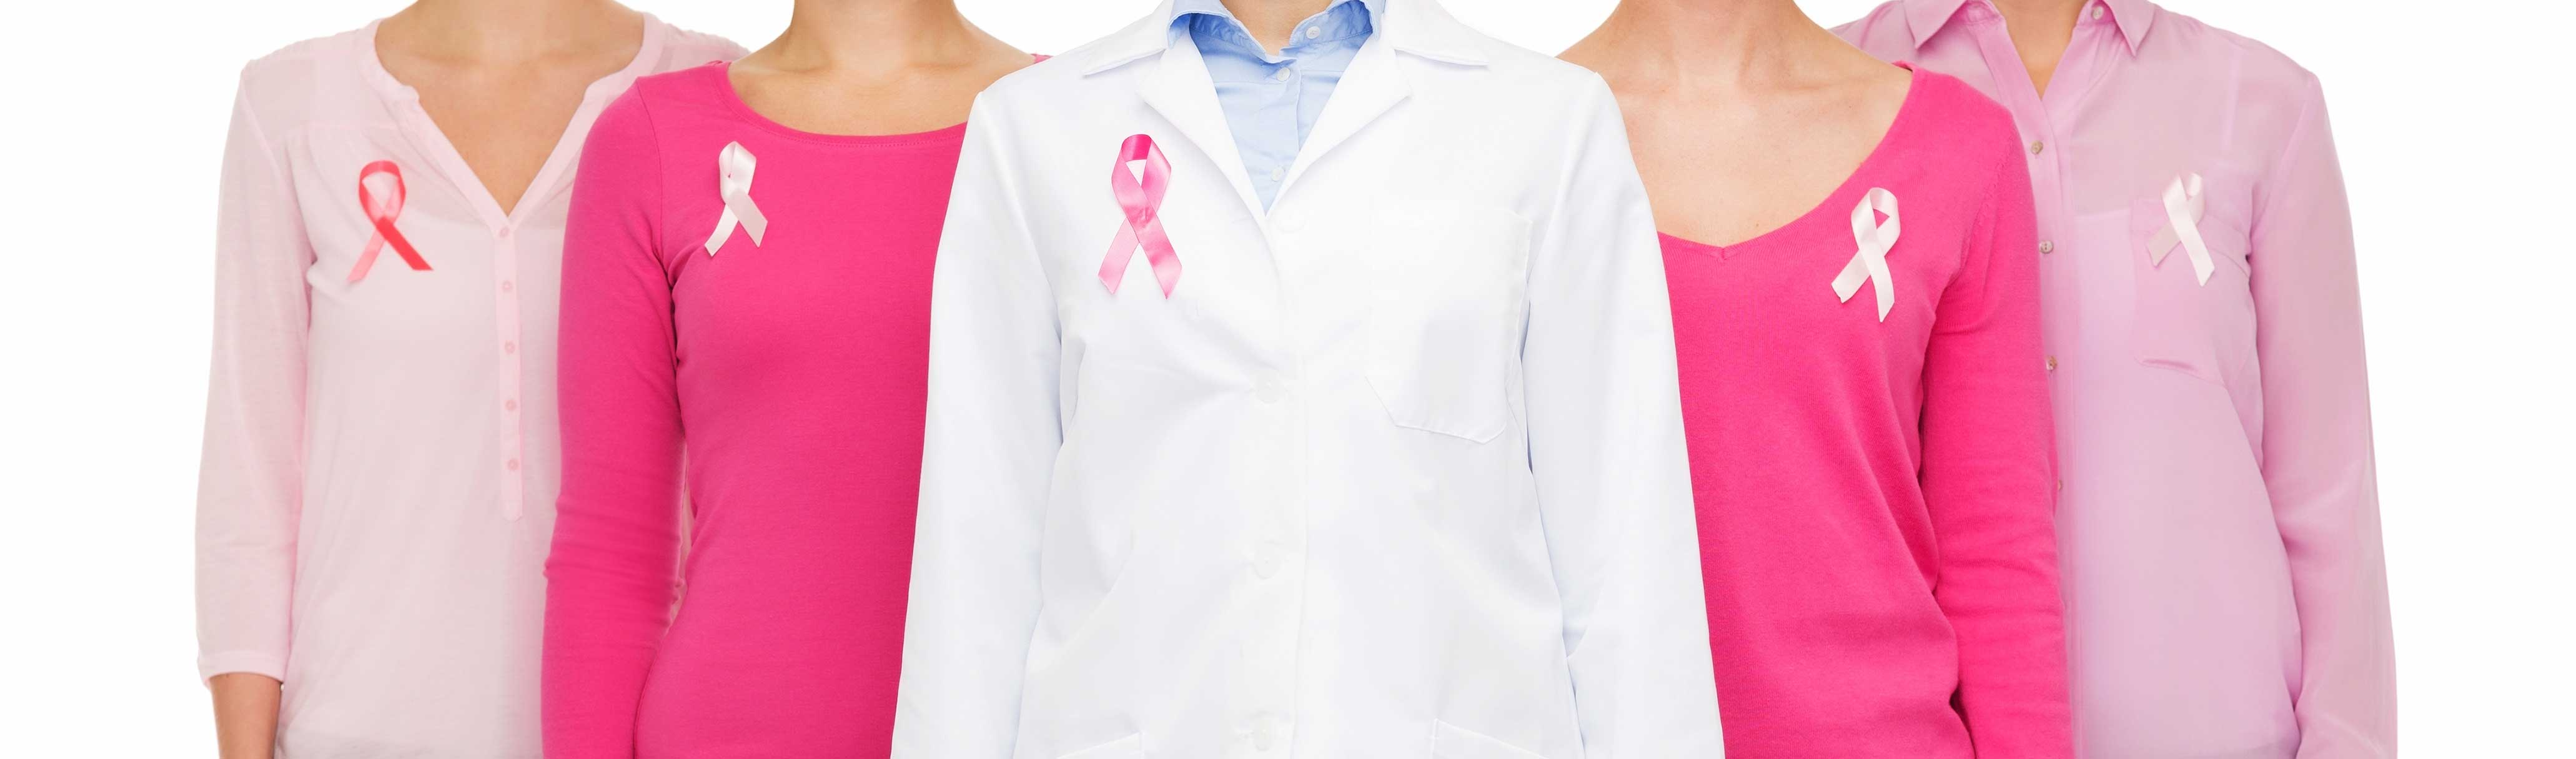 Methodist Health System is bringing breast cancer awareness to women.